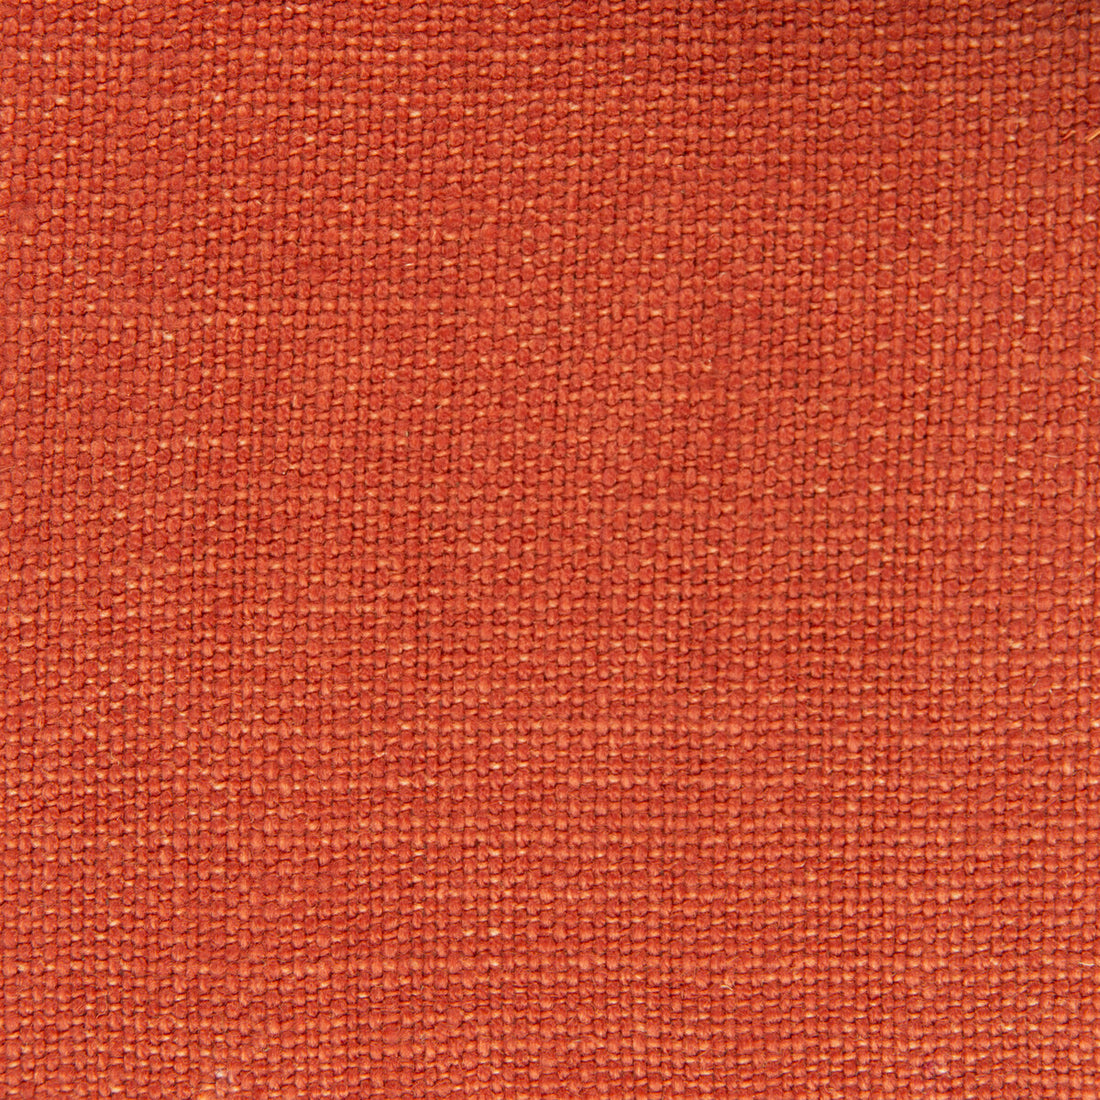 Nicaragua fabric in ladrillo color - pattern GDT5239.008.0 - by Gaston y Daniela in the Basics collection